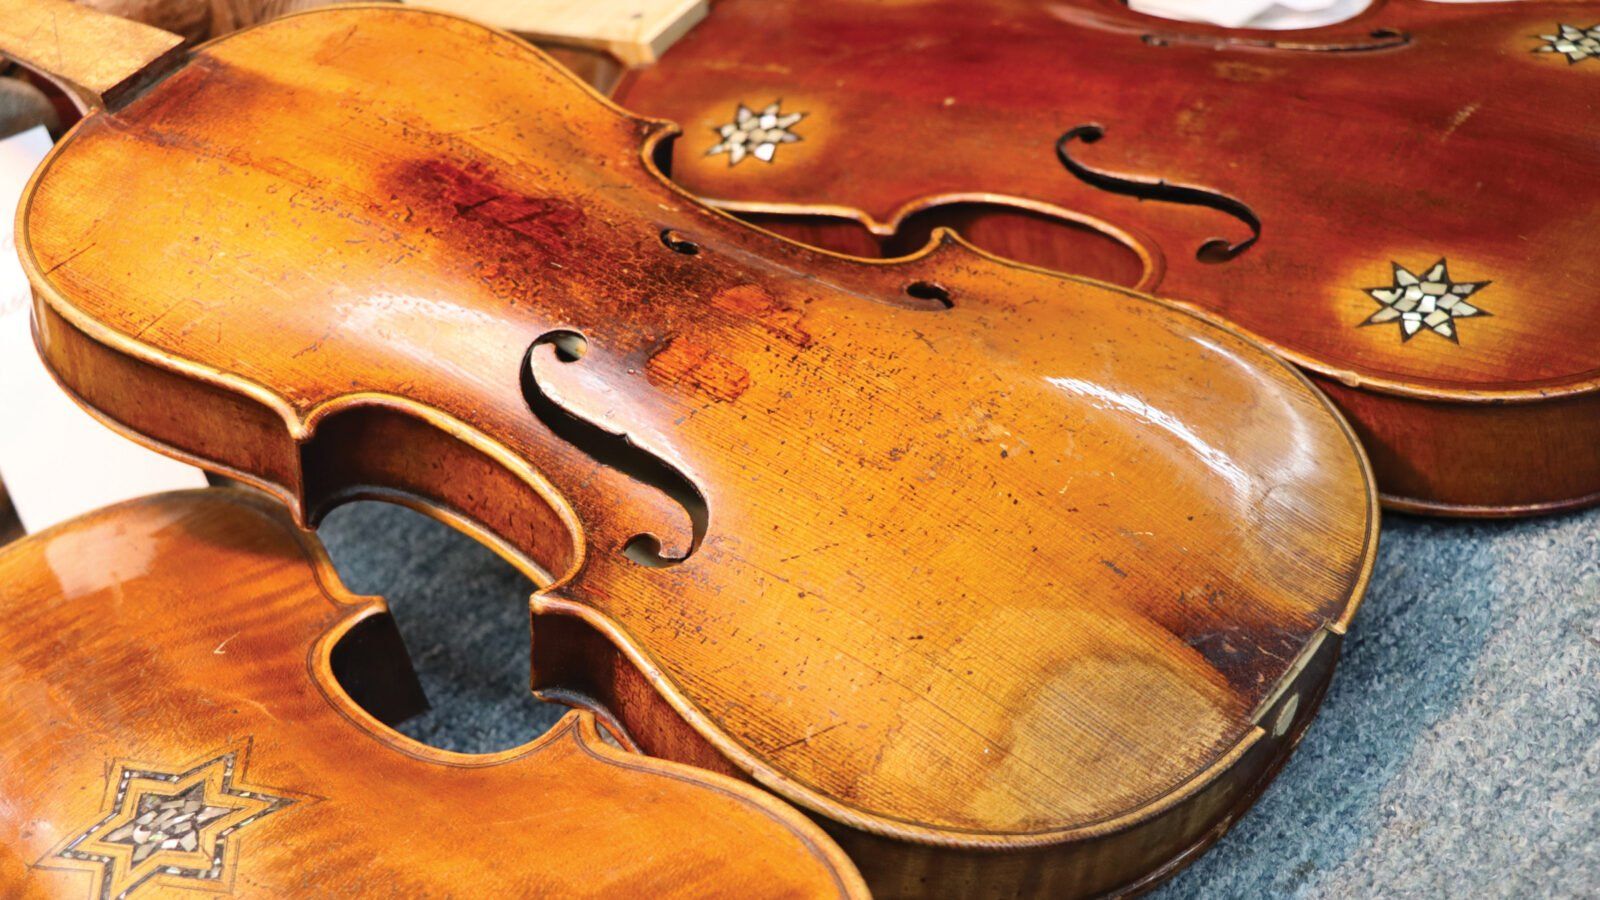 Featured image for “Instruments of Memory: Violins Honor Holocaust Survivors, Victims, and Stories”